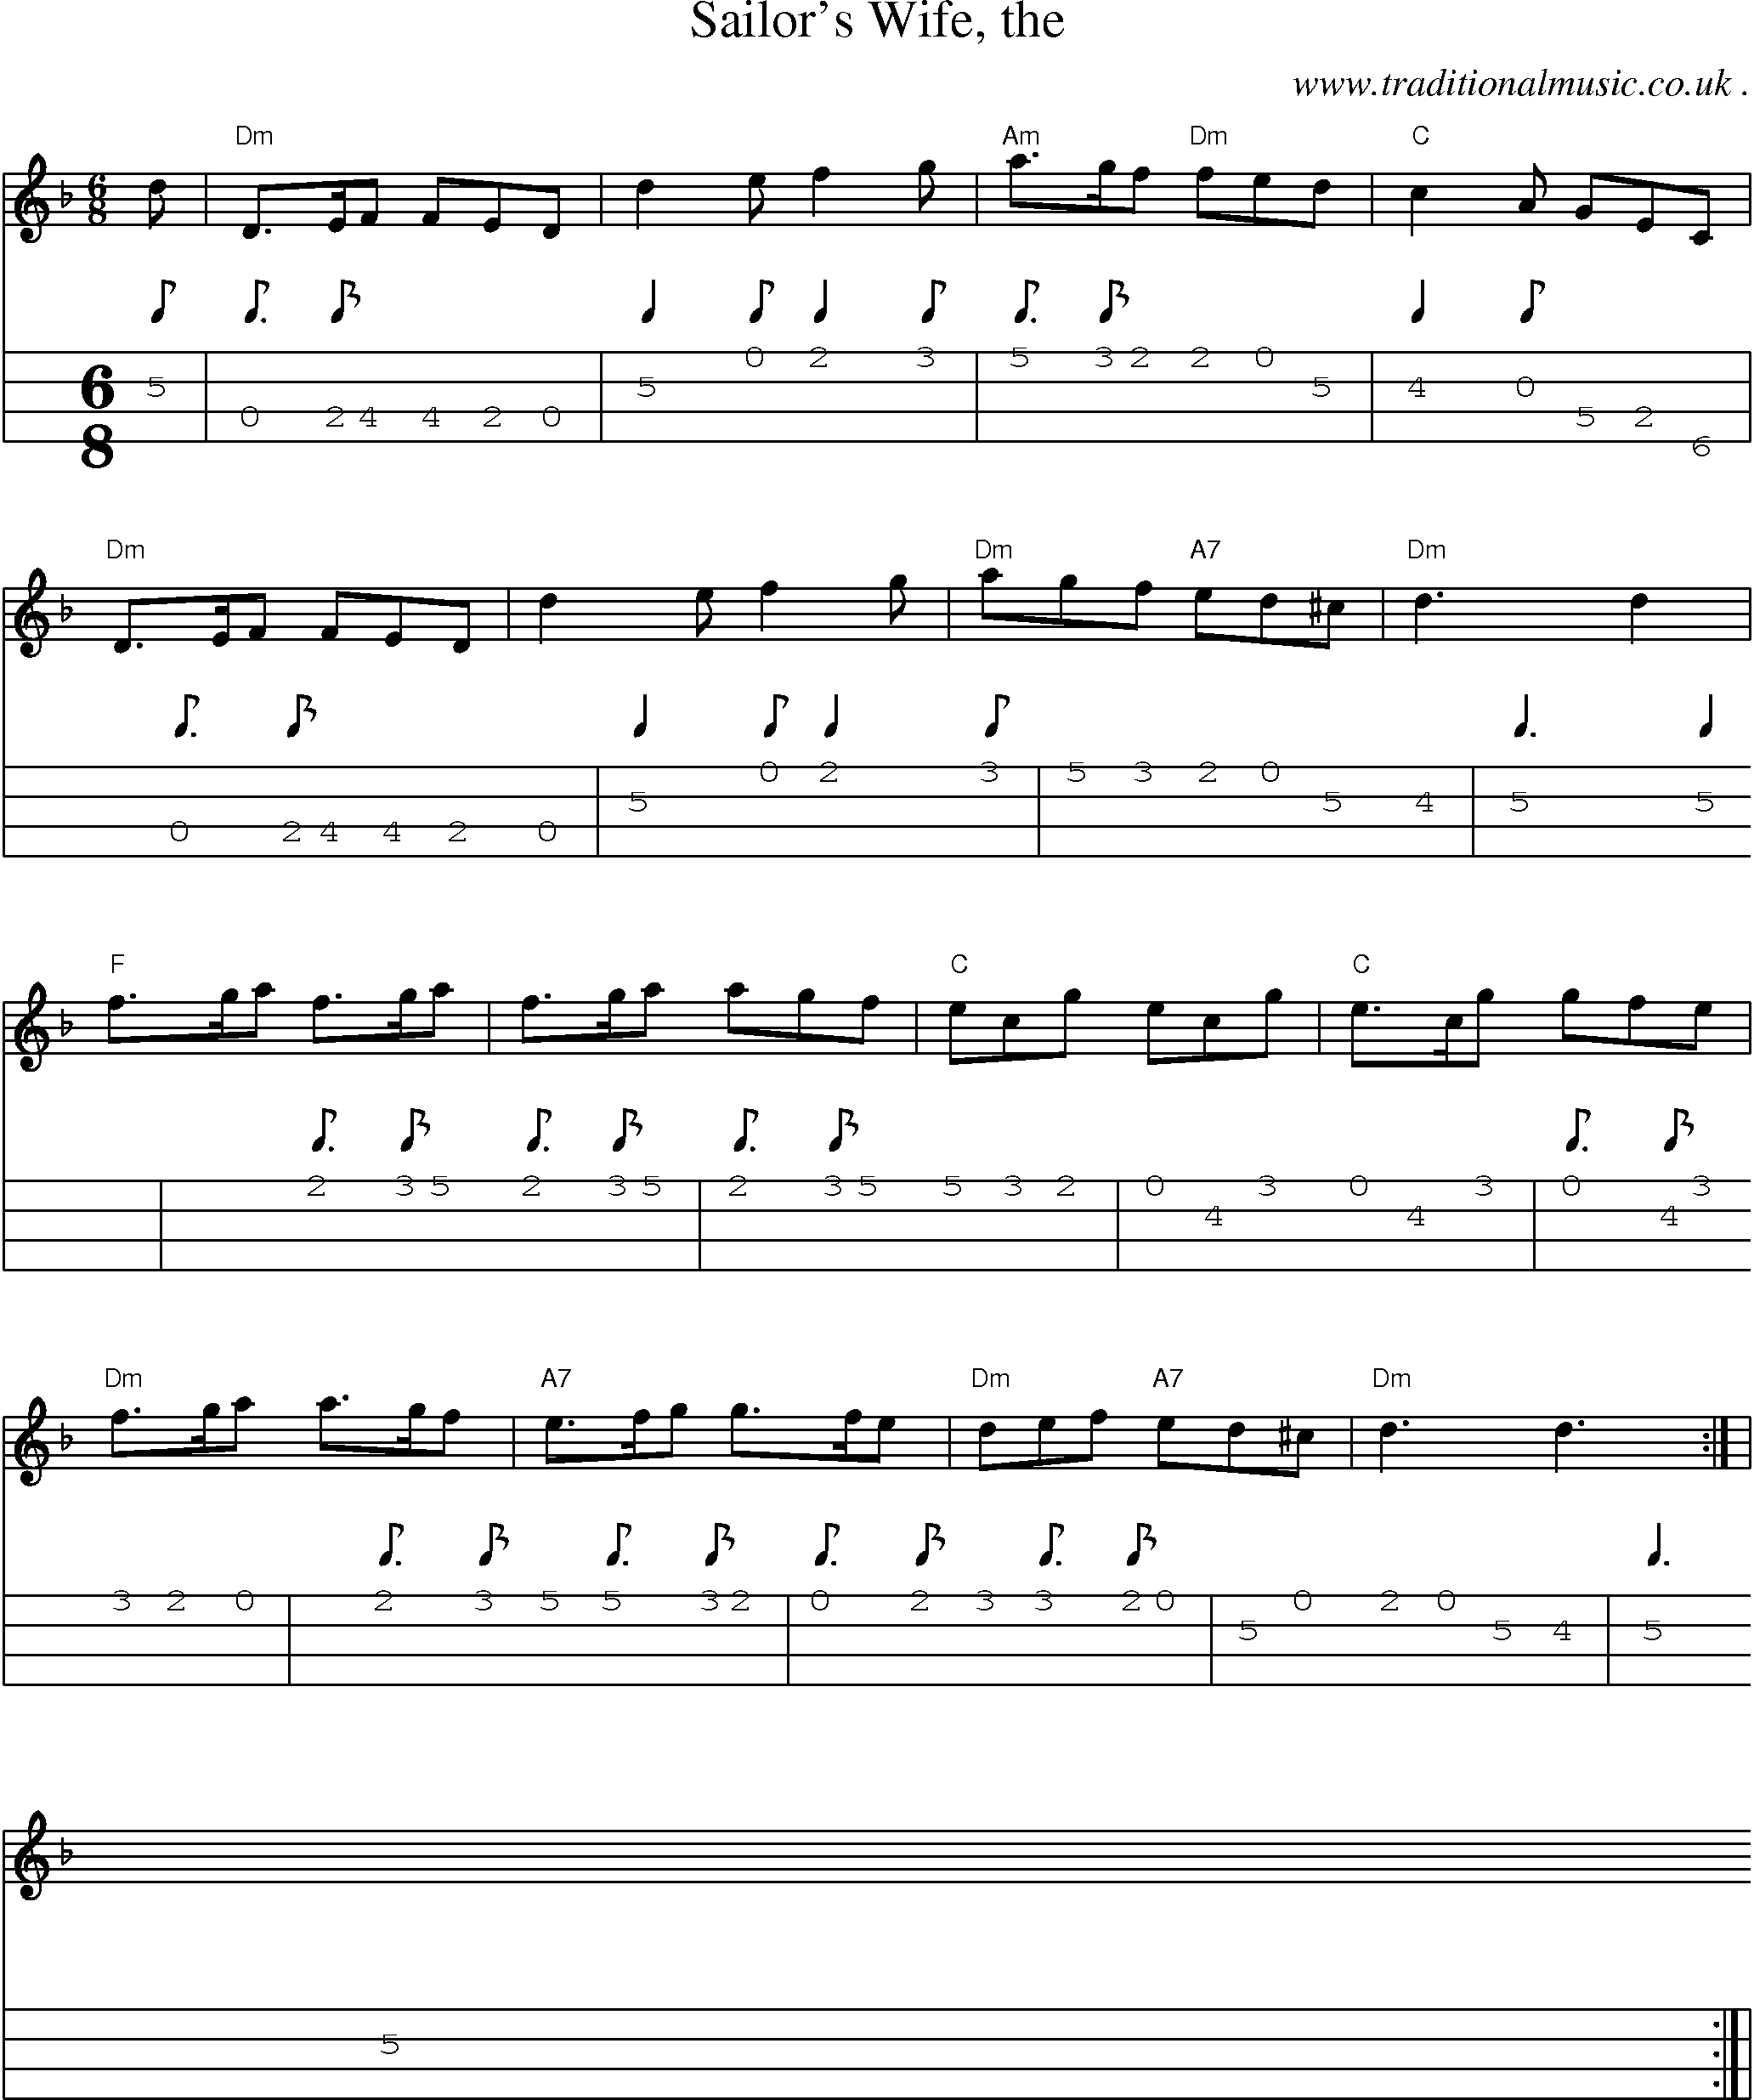 Sheet-music  score, Chords and Mandolin Tabs for Sailors Wife The